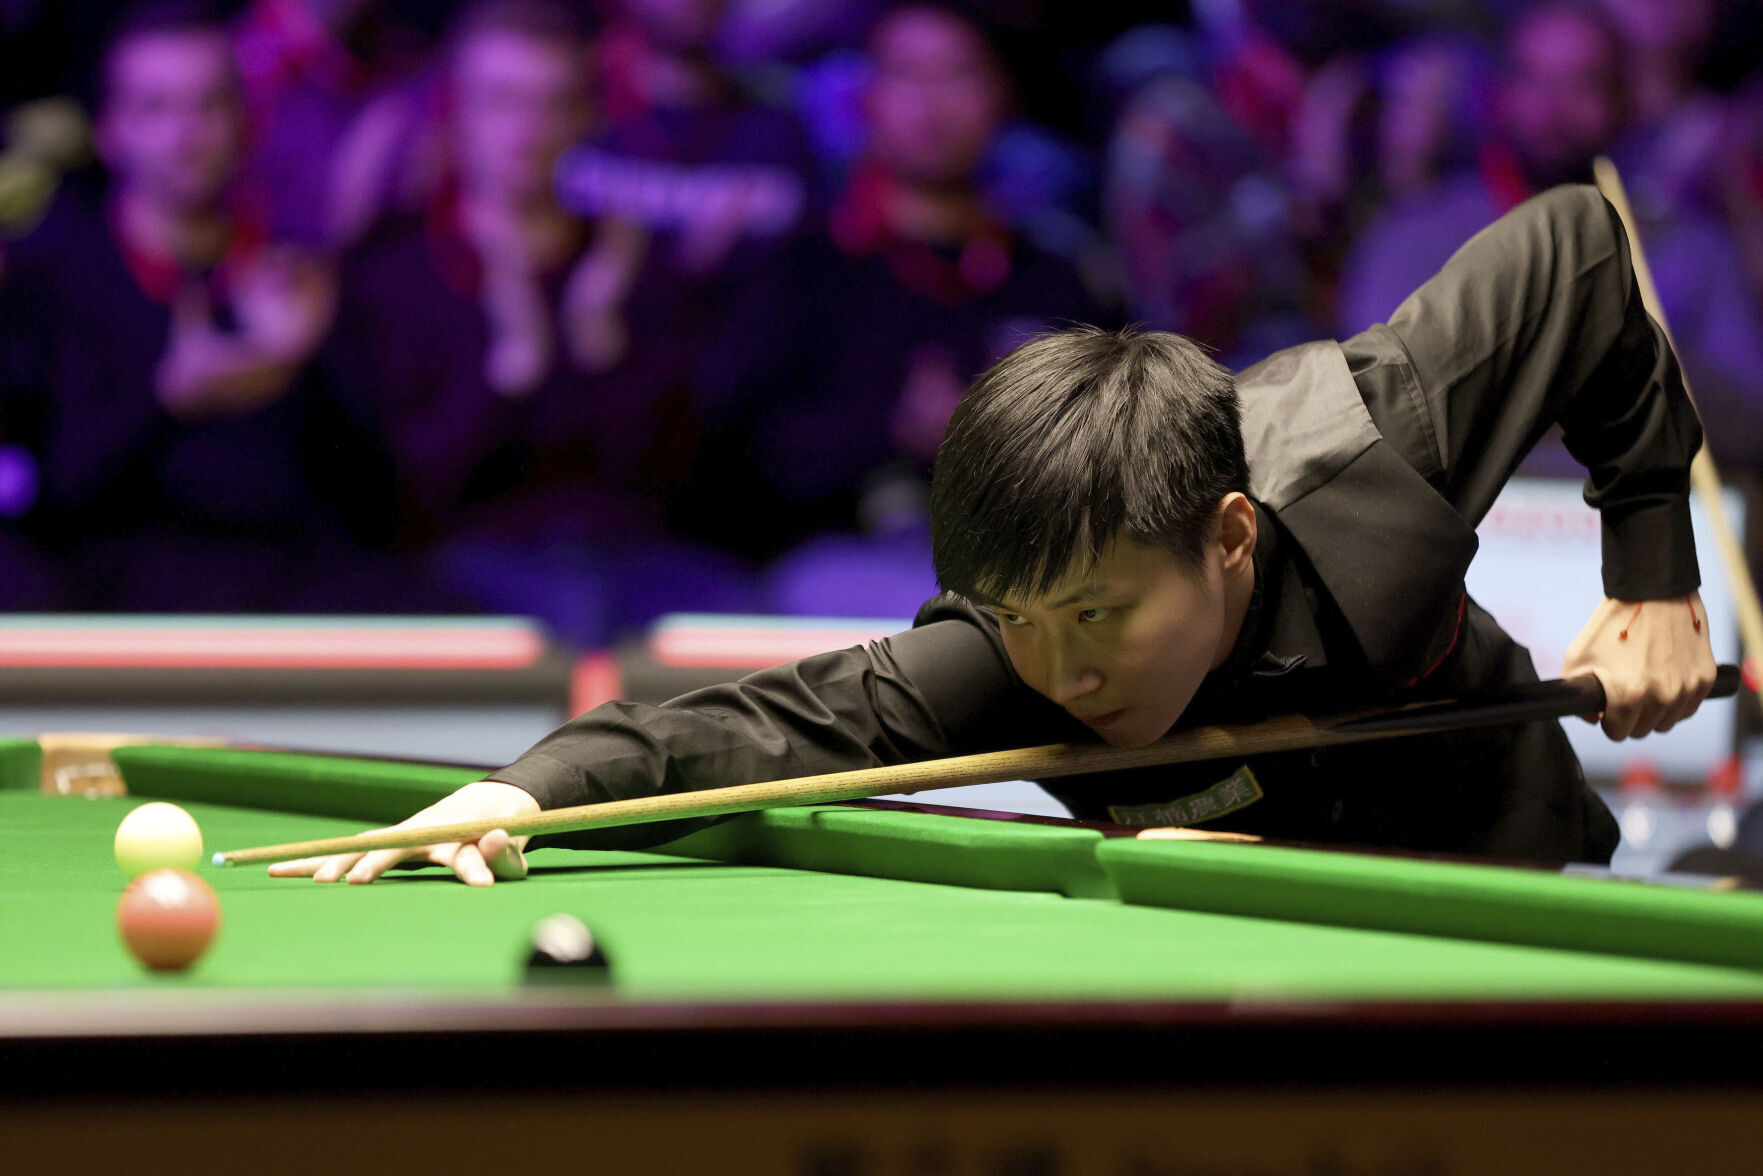 10 Chinese snooker players face match-fixing charges